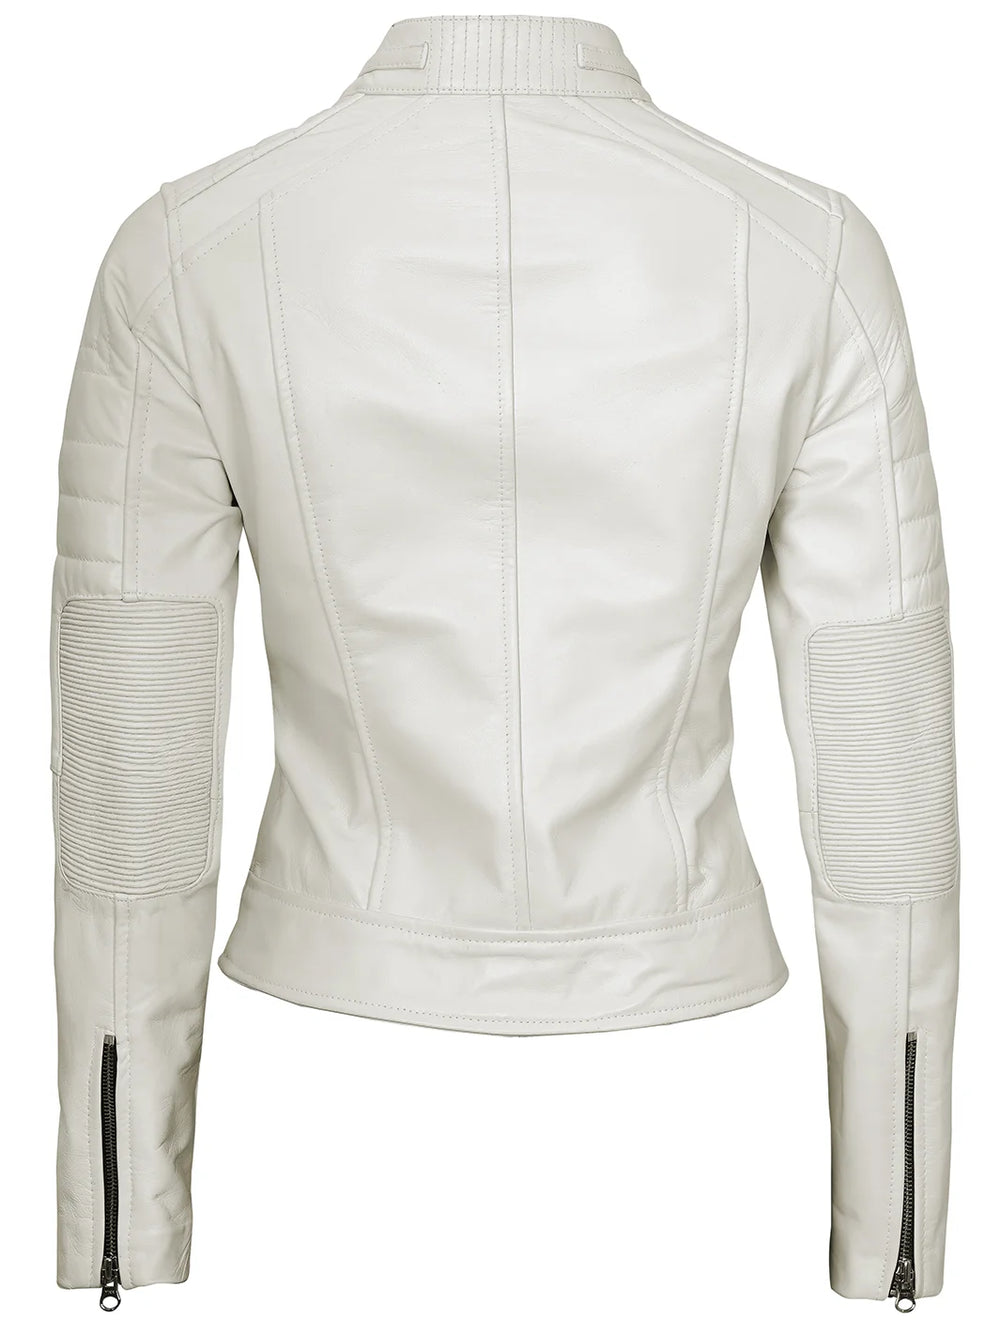 CAfe racer leather jacket for women